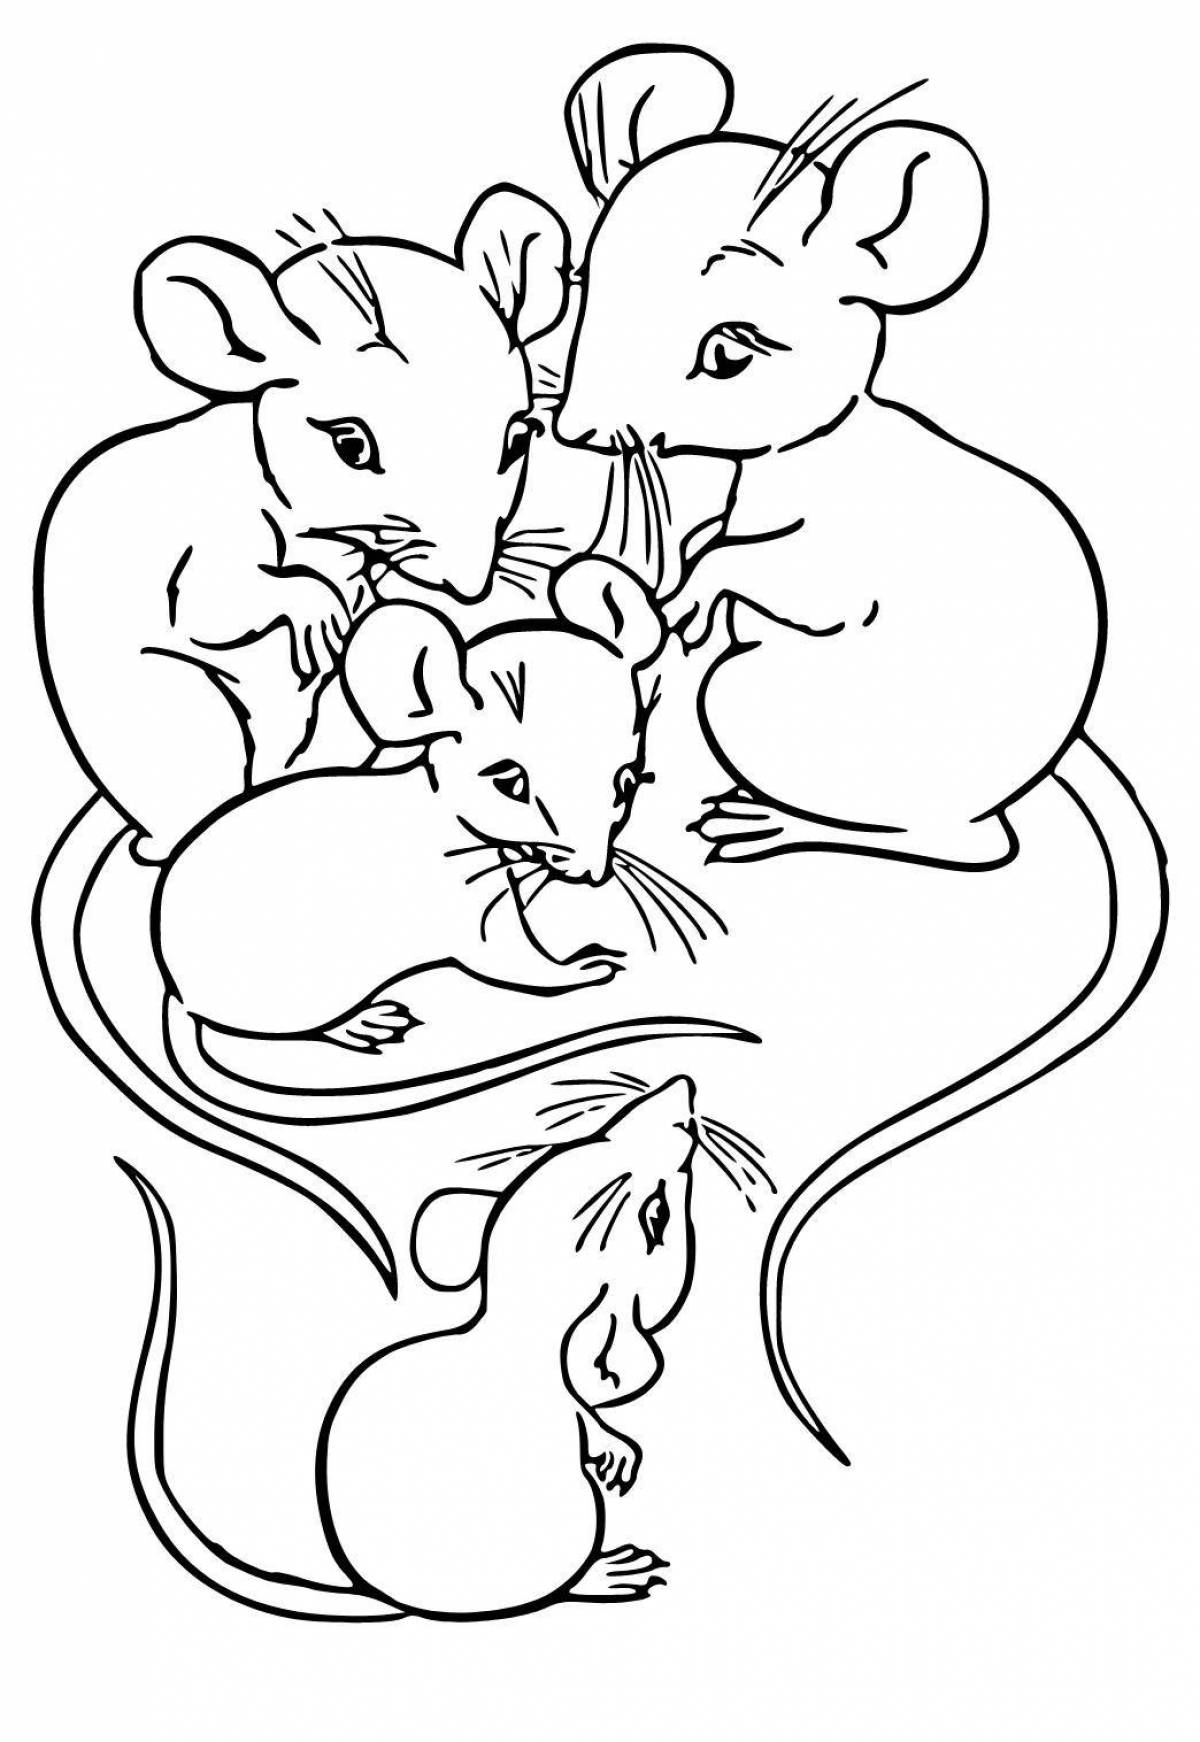 Creative mouse coloring book for 2-3 year olds